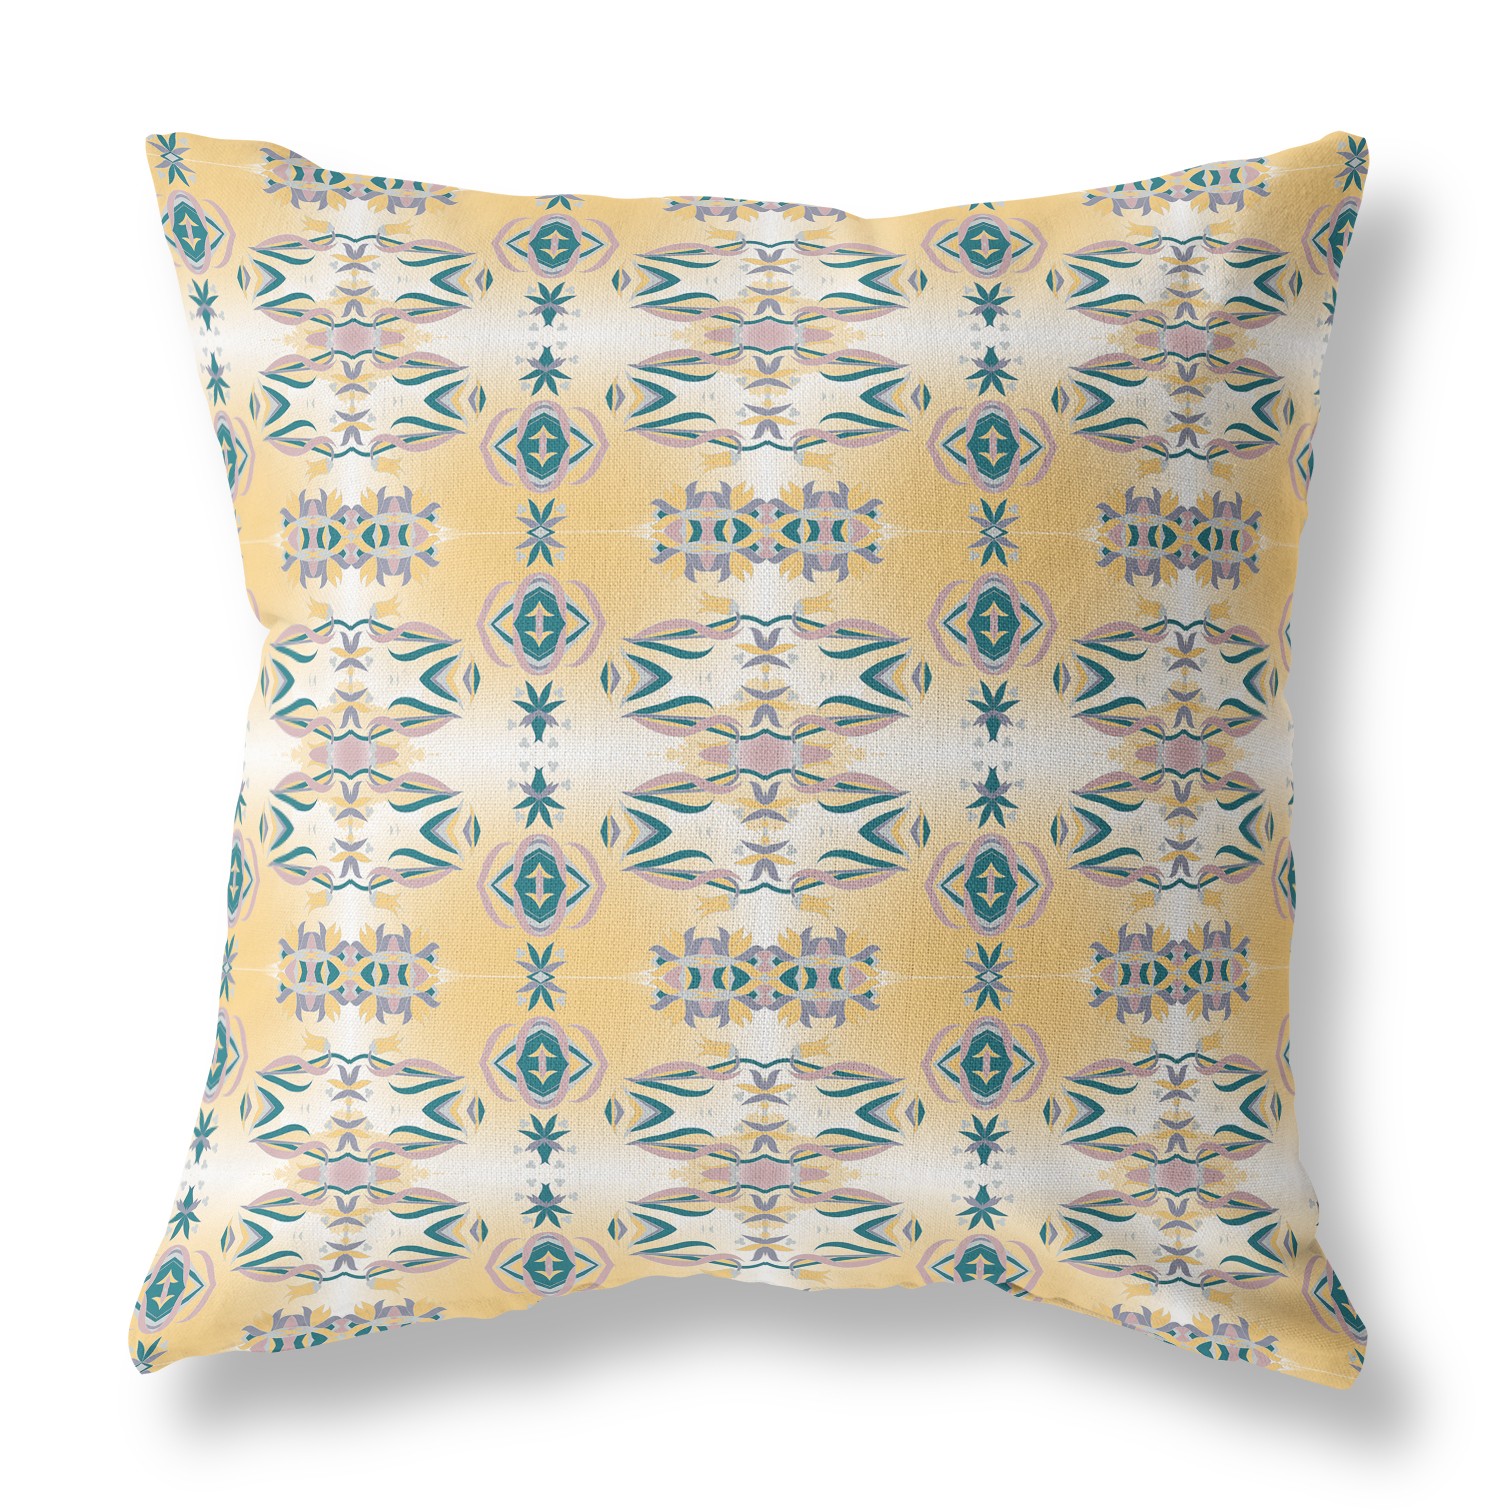 18” Tan Blue Patterned Indoor Outdoor Zippered Throw Pillow-411066-1